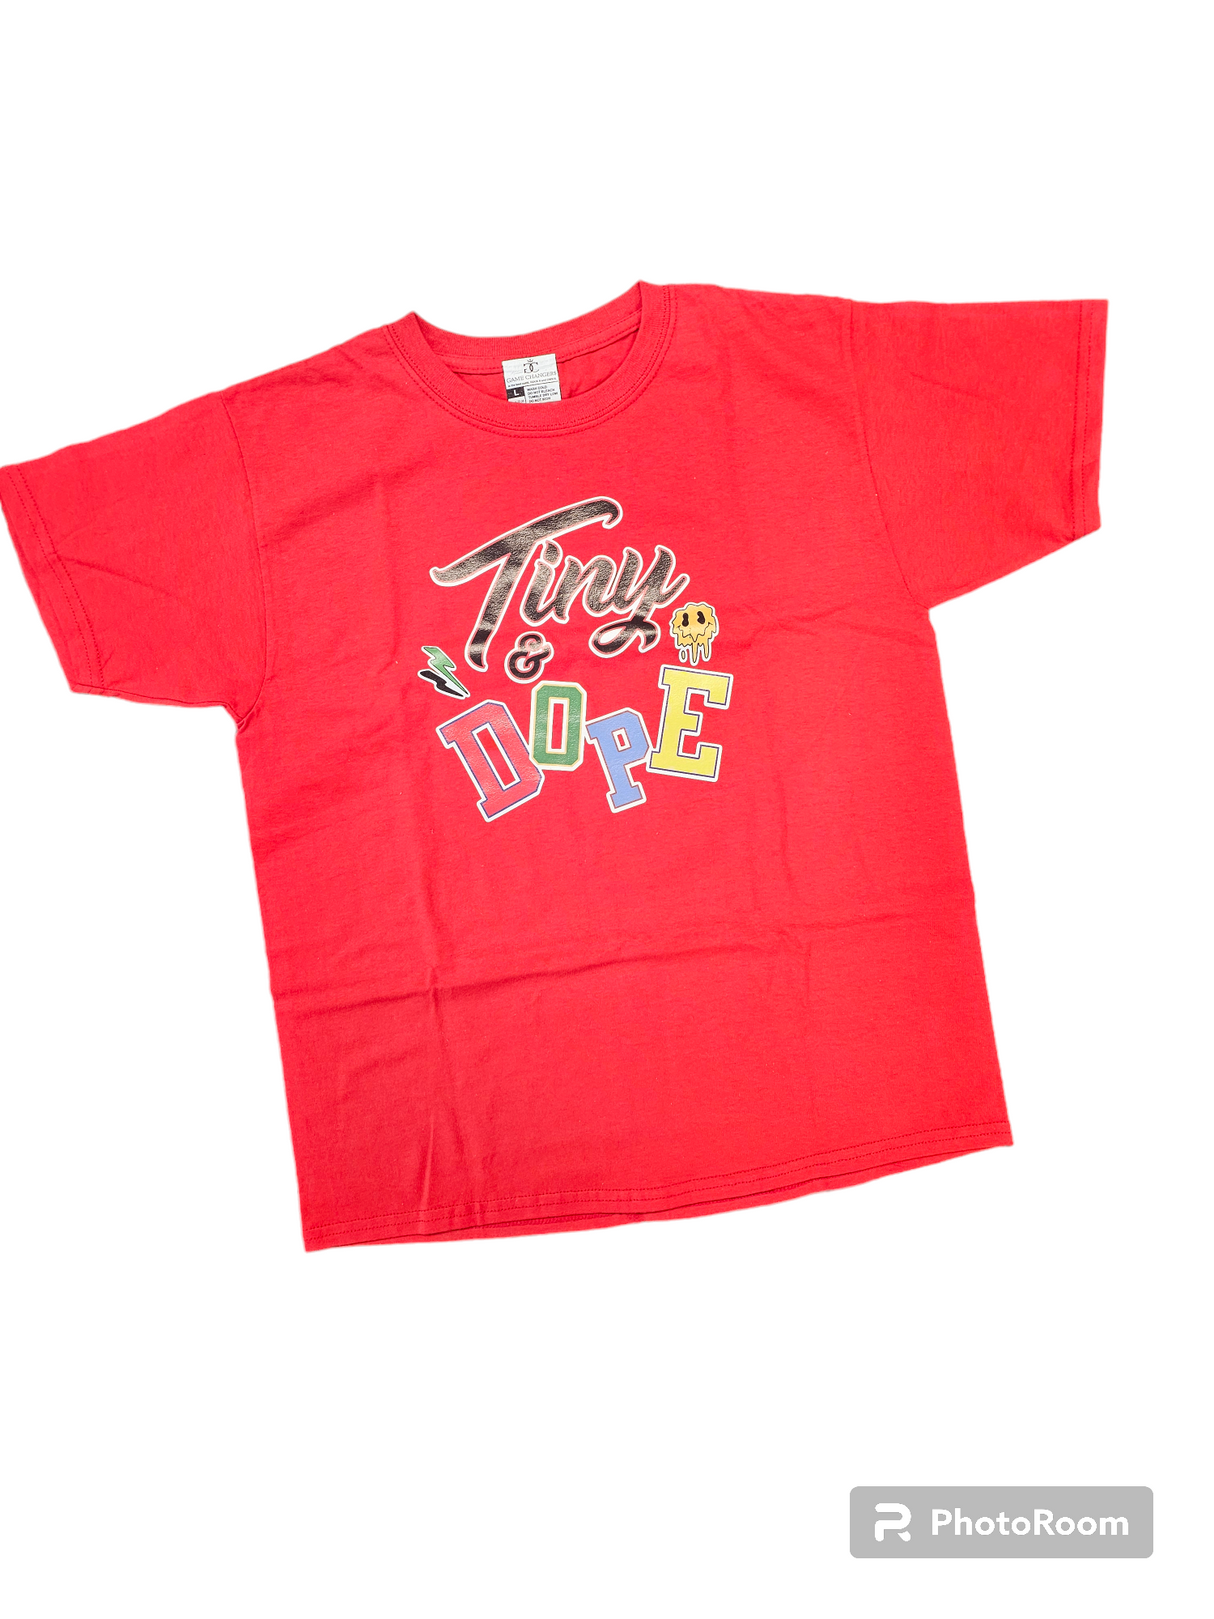 Game Changer - Kids - T Shirt - Tiny Dope - Red